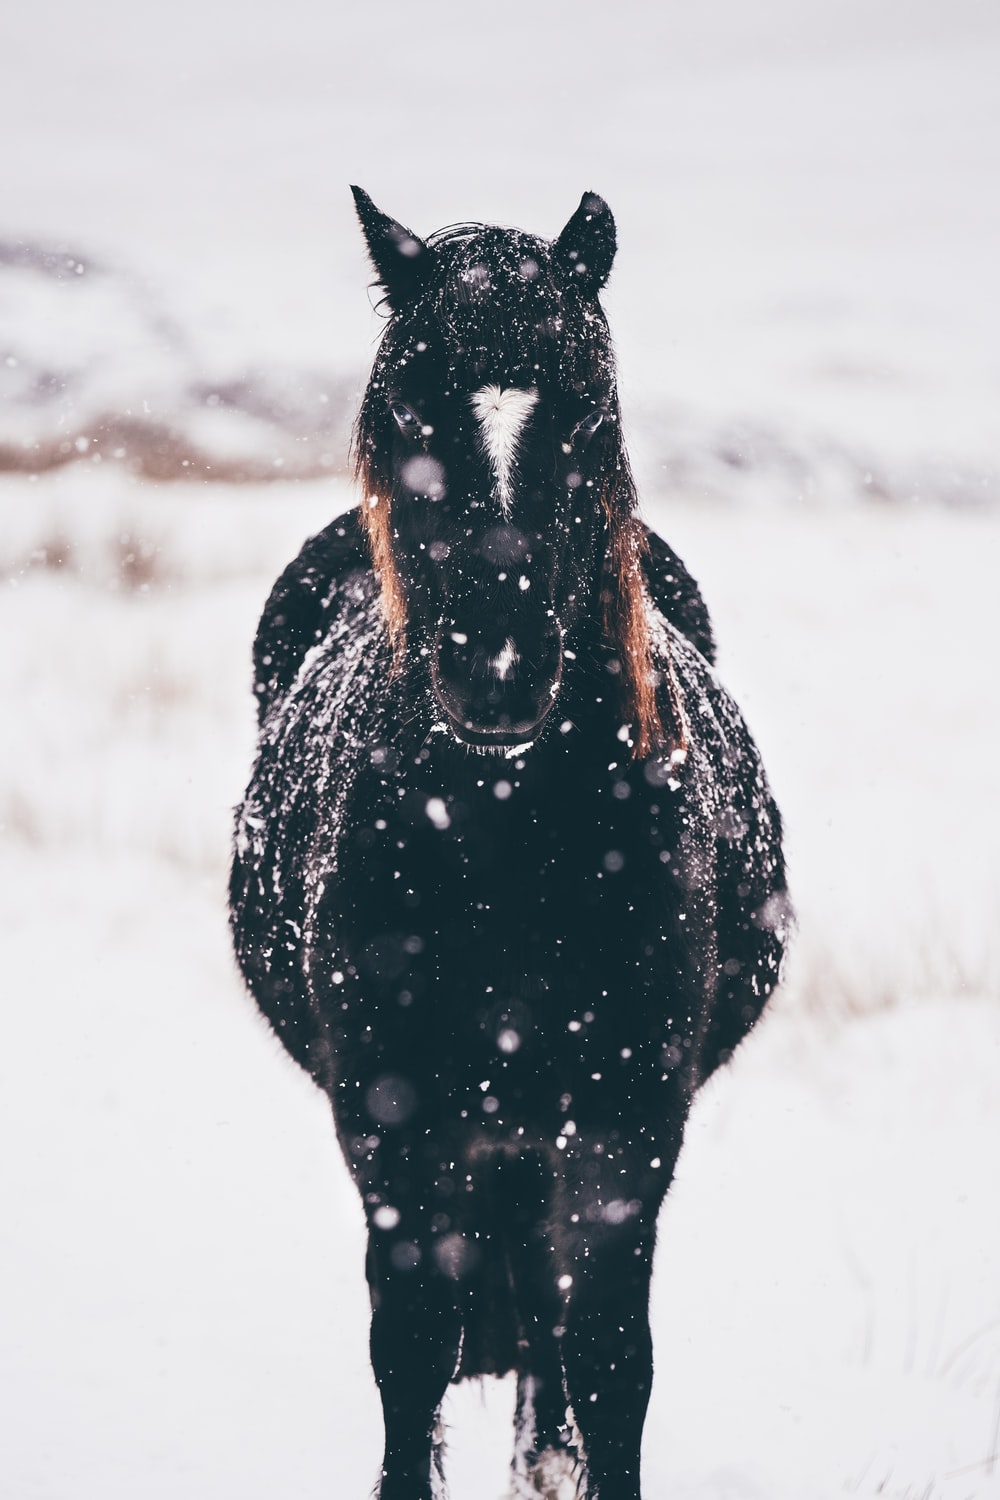 Black And White Horse Picture. Download Free Image